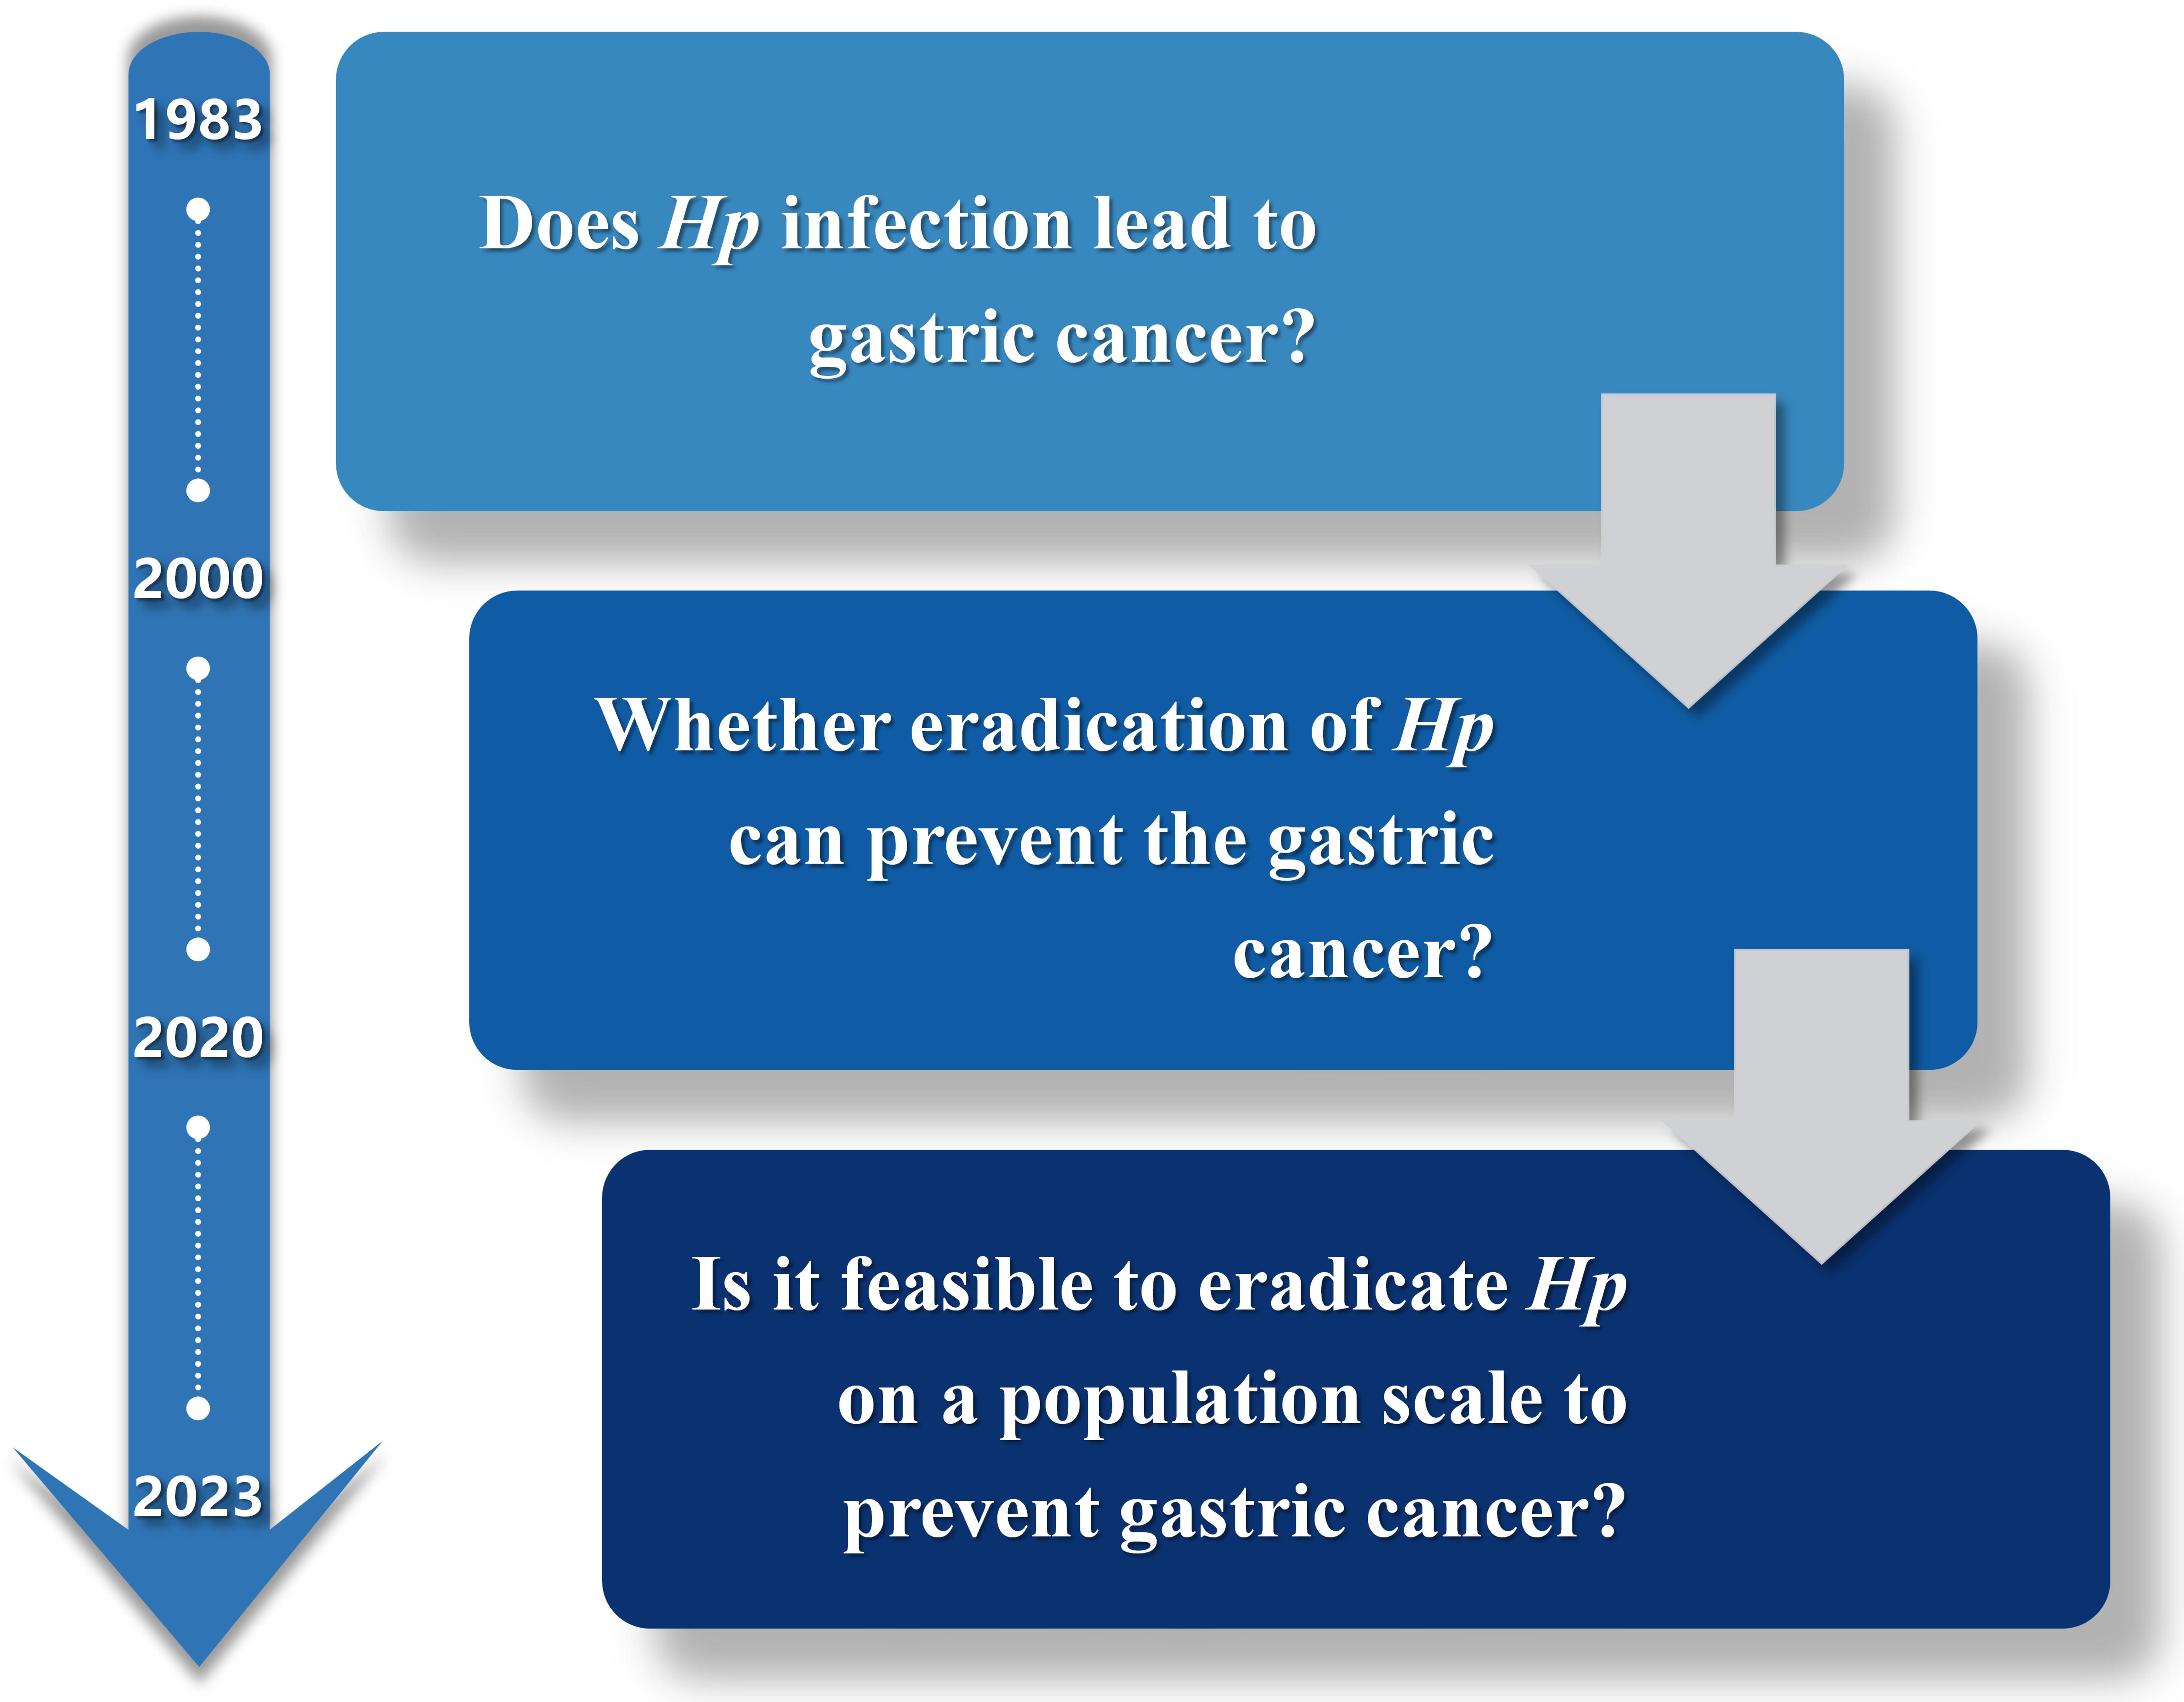 Main topics of investigations of the relationship between <italic>Helicobacter pylori infection</italic> and gastric cancer.